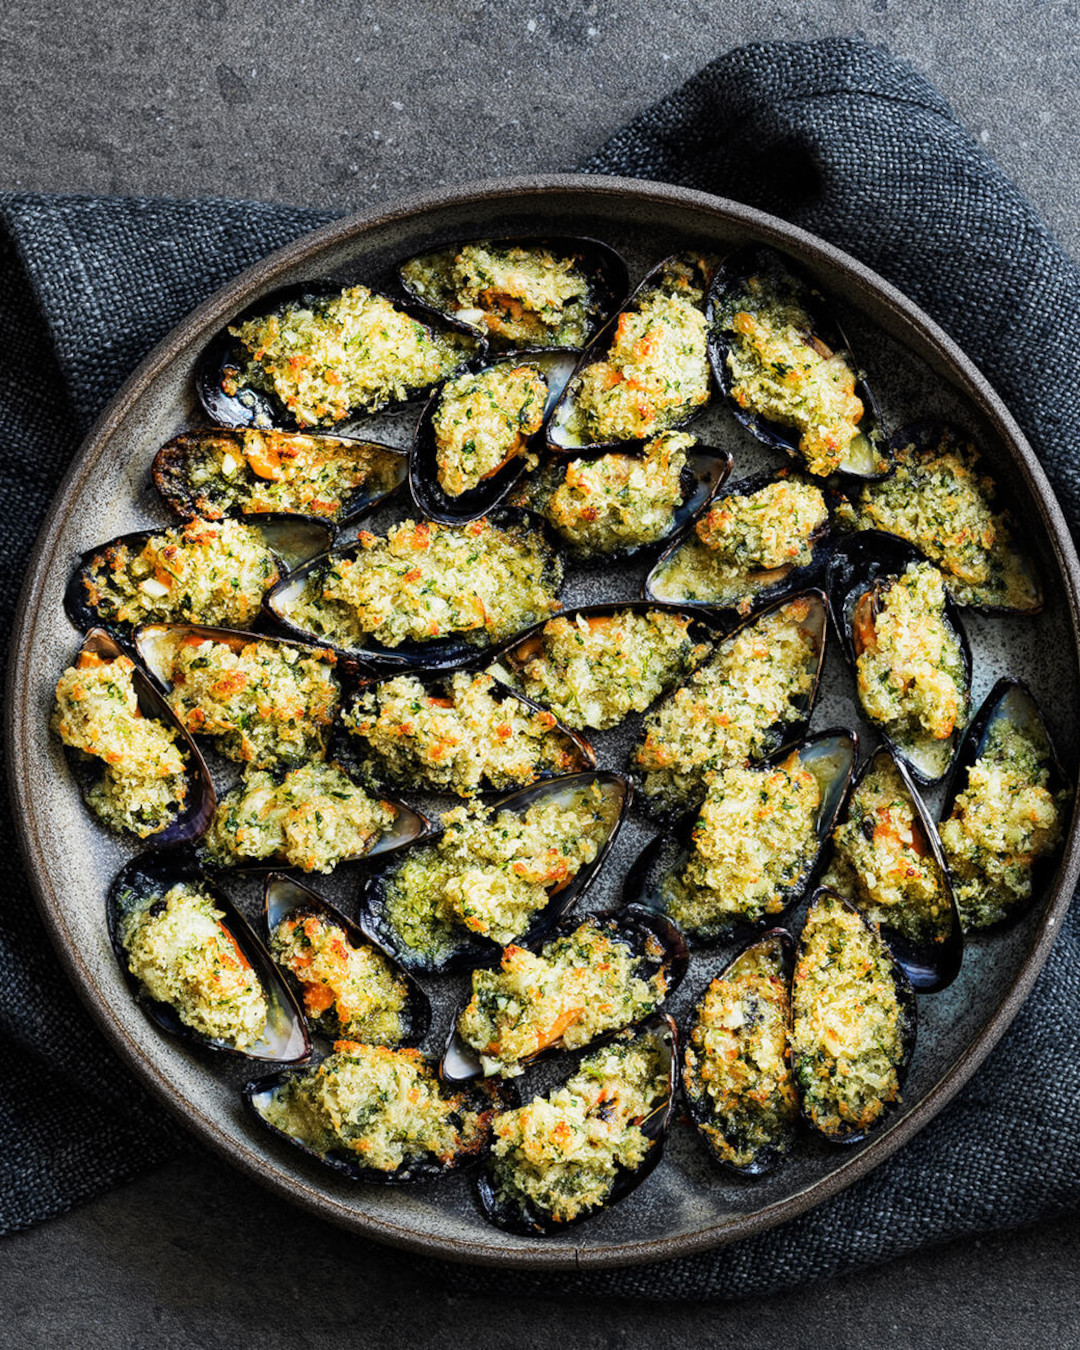 Gratinated-mussels-2000x1300-compresed-mobile.jpg